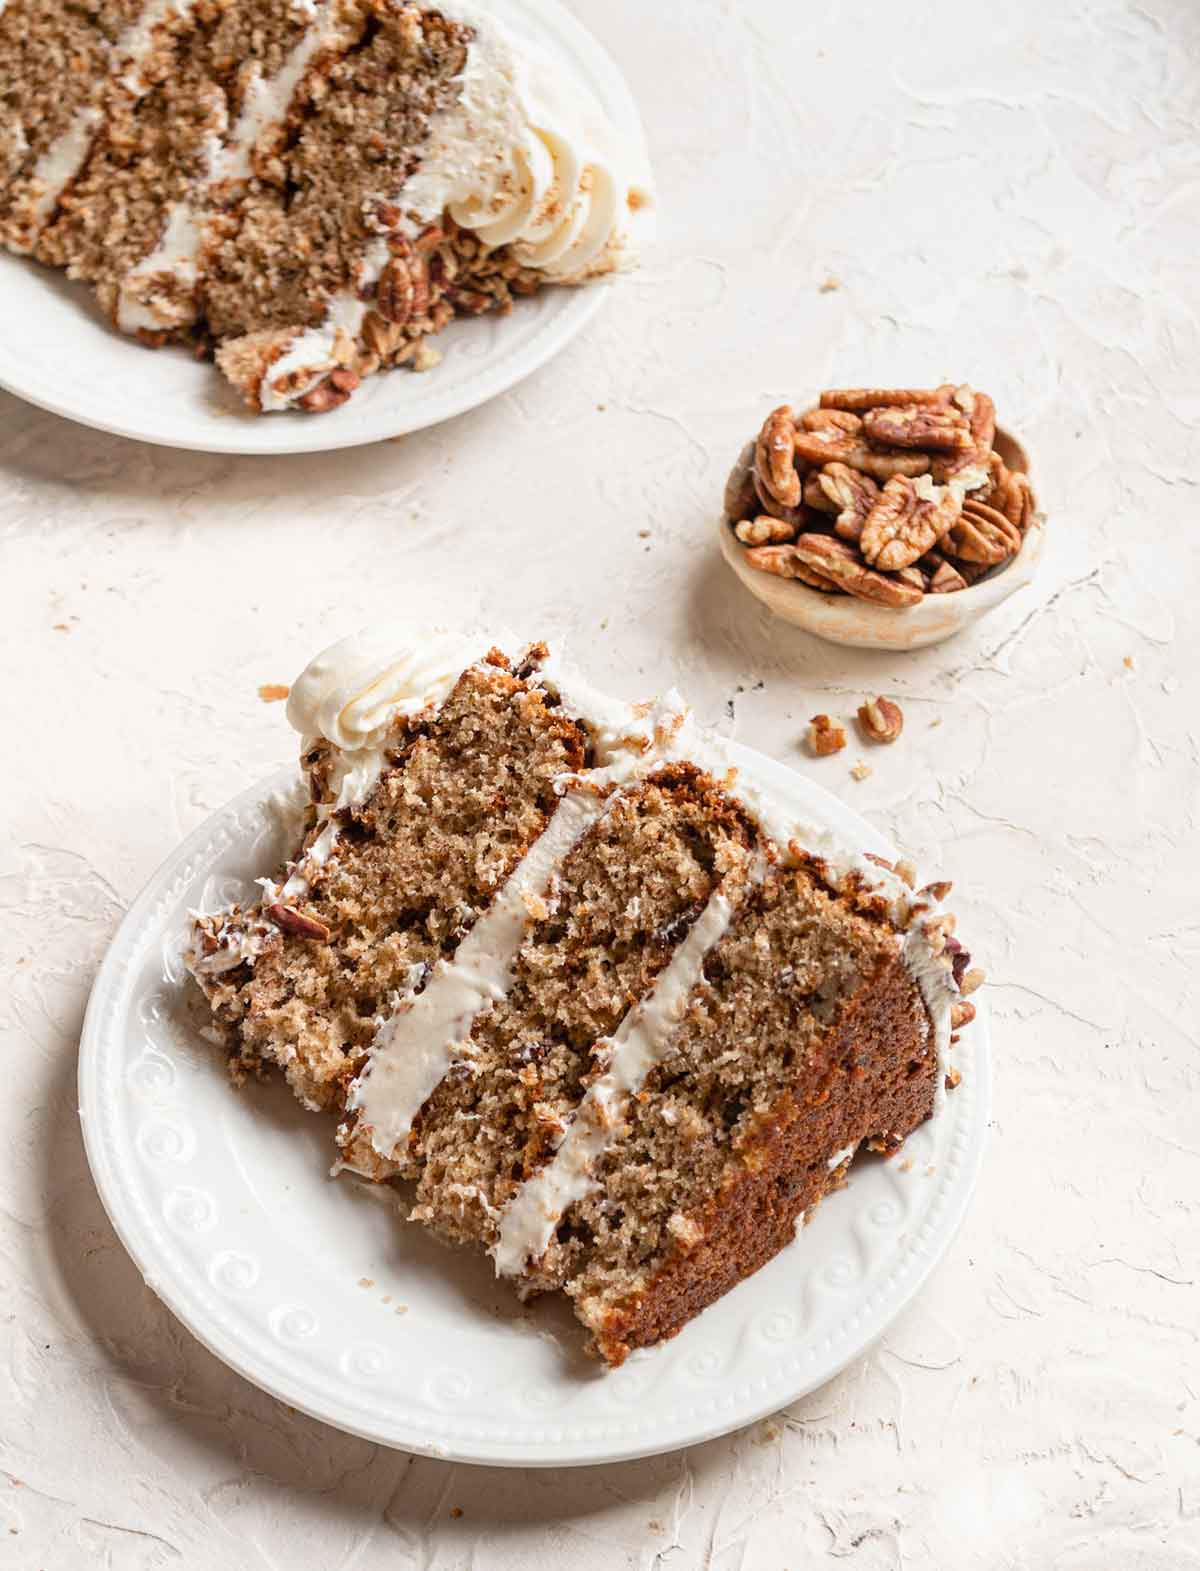 Slice of hummingbird cake on a white plate with a small bowl of pecans in the background.